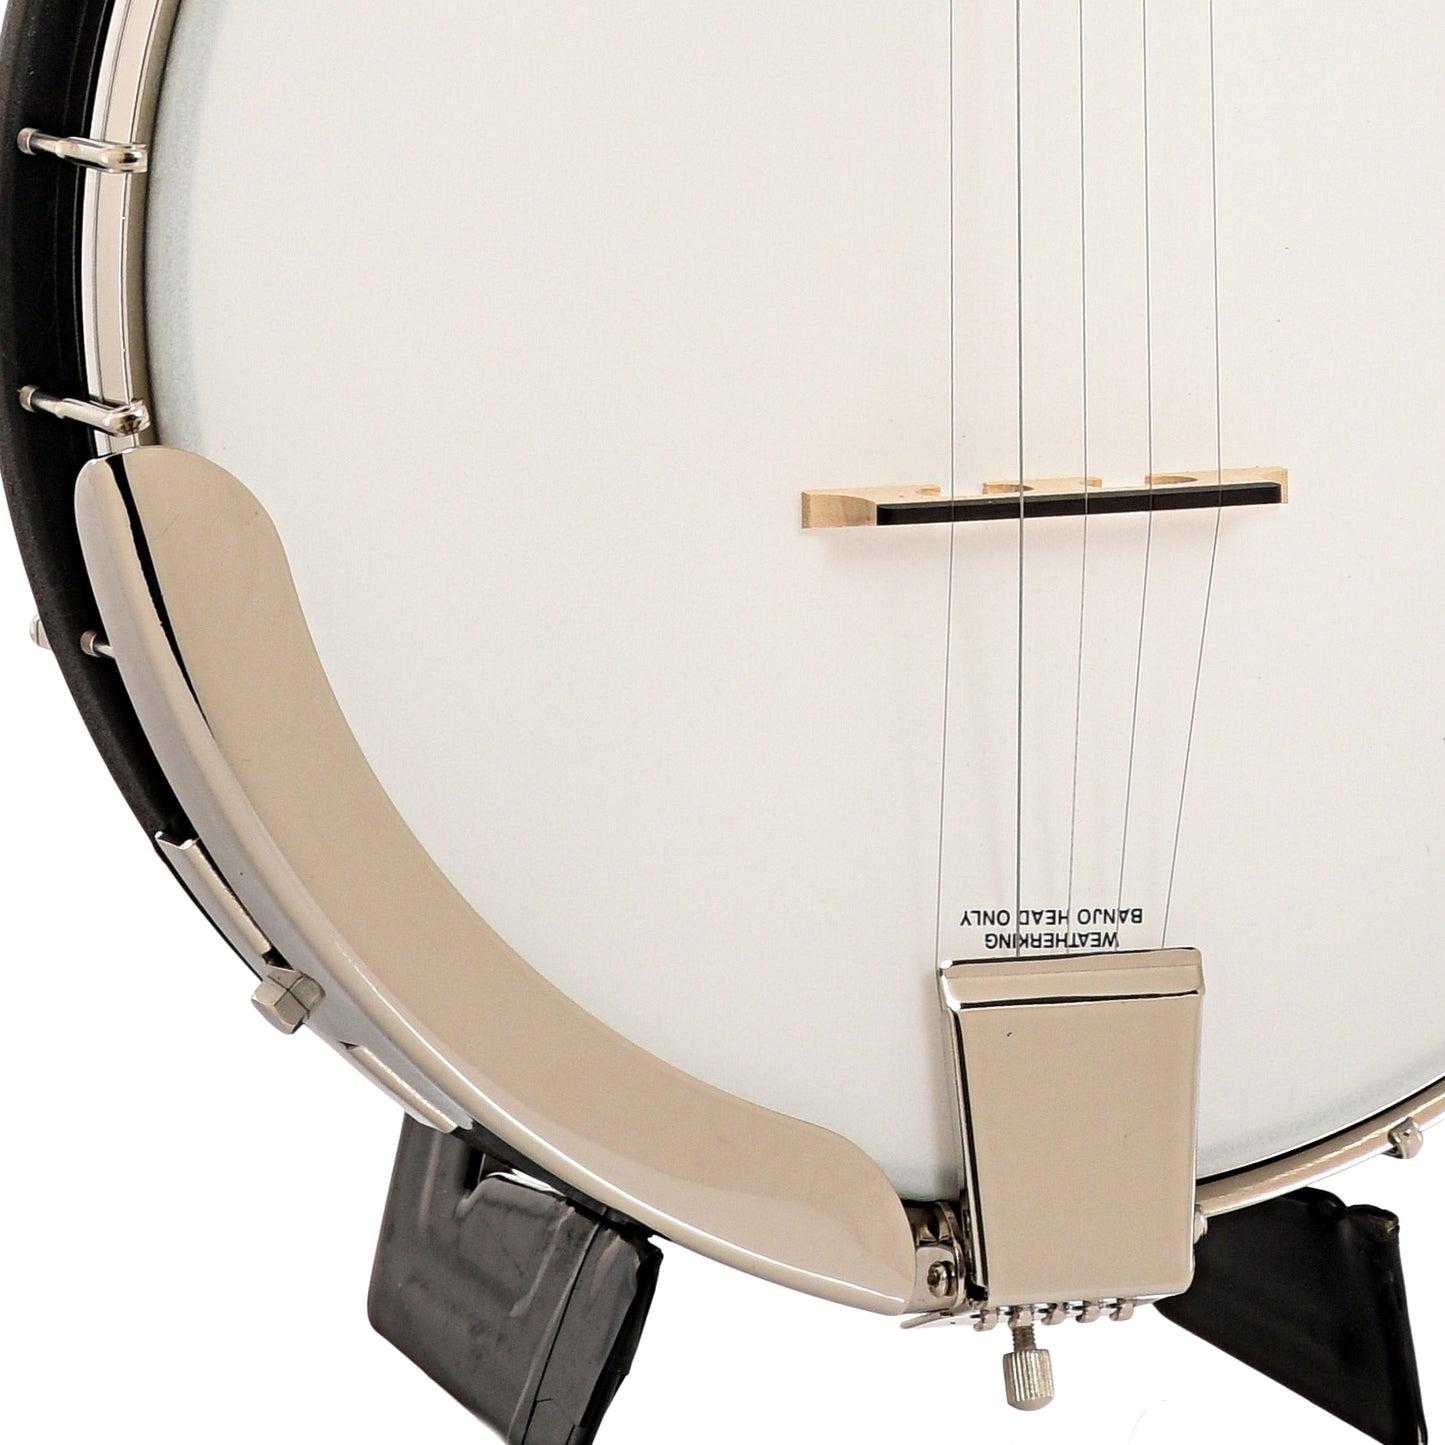 Armrest, Bridge and tailpiece of Rover RB-20 Open Back Banjo